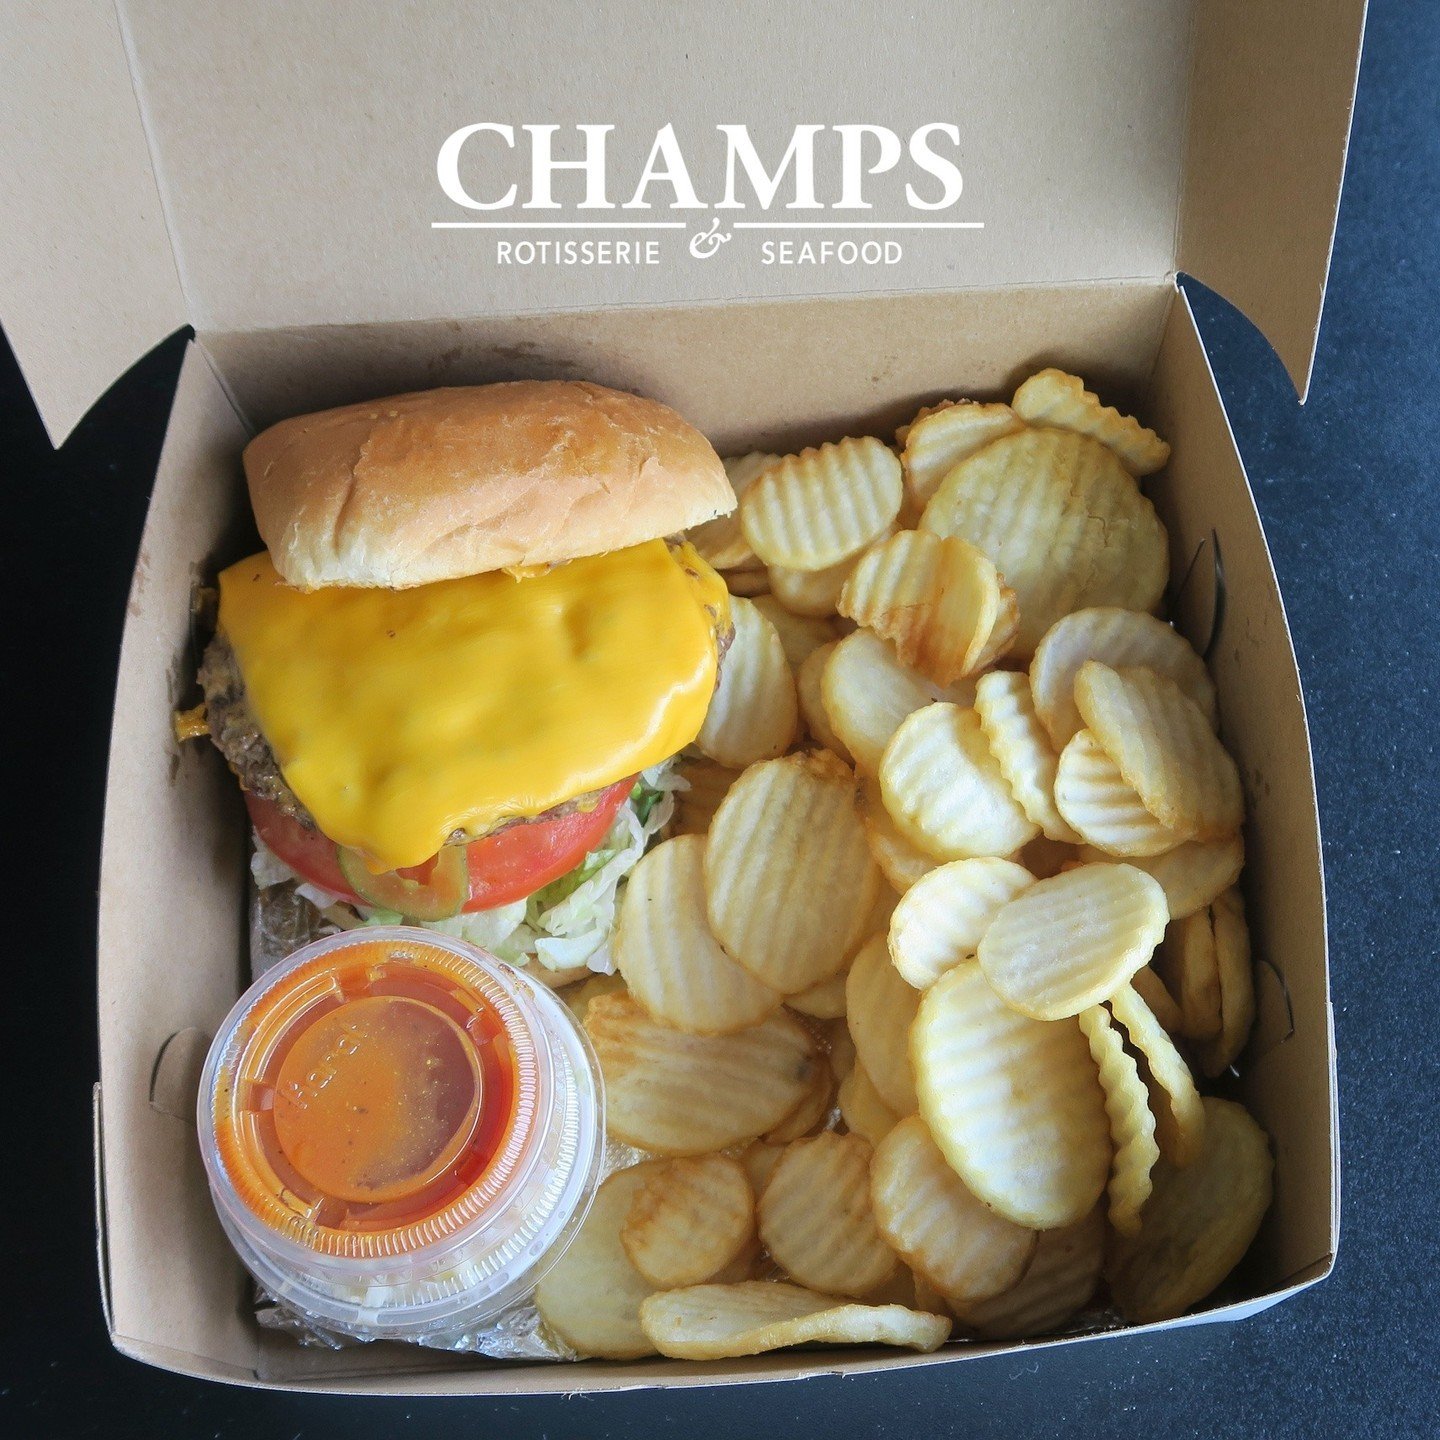 Elevate Your Home Dining Experience: Order Carry-Out Today!

View Menu: https://www.champsrotisserie.com/menu

Place Order: (313) 886-7755